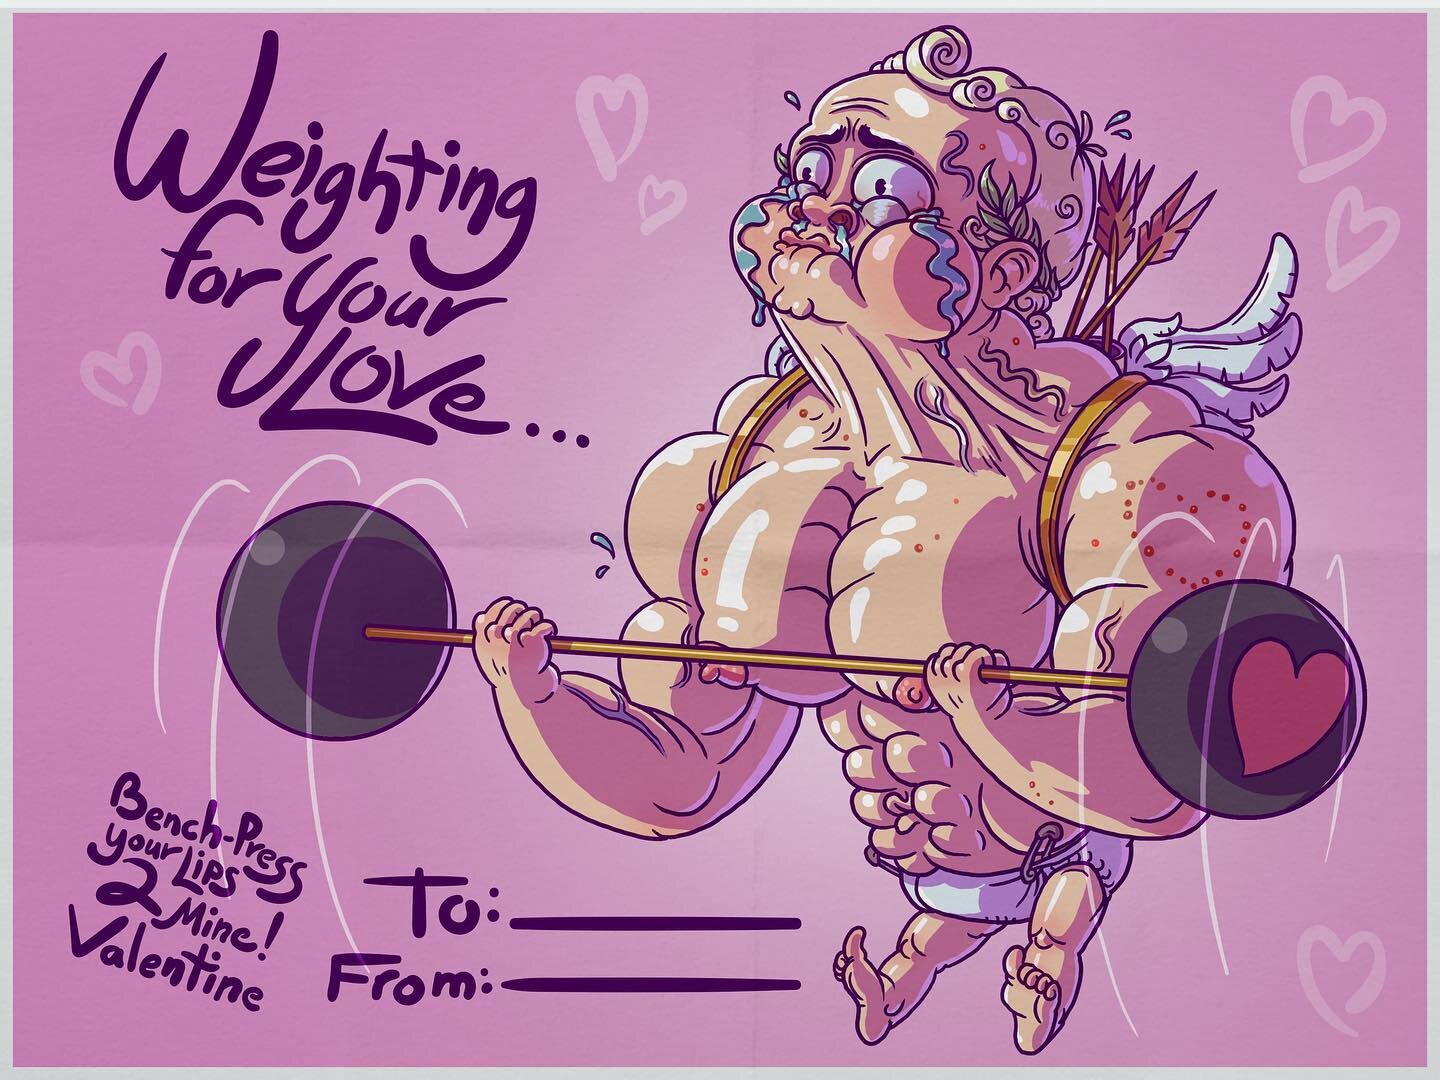 Here to lift you up this valentines!💖💖💖💖💖💖💖💖💖💖💖💖💖💖💖💖💖
#valentines #valentinescard #cupid #gym #weightlifting #muscles #illustration #cartoon #love #valentinesart #digitalart #drawing